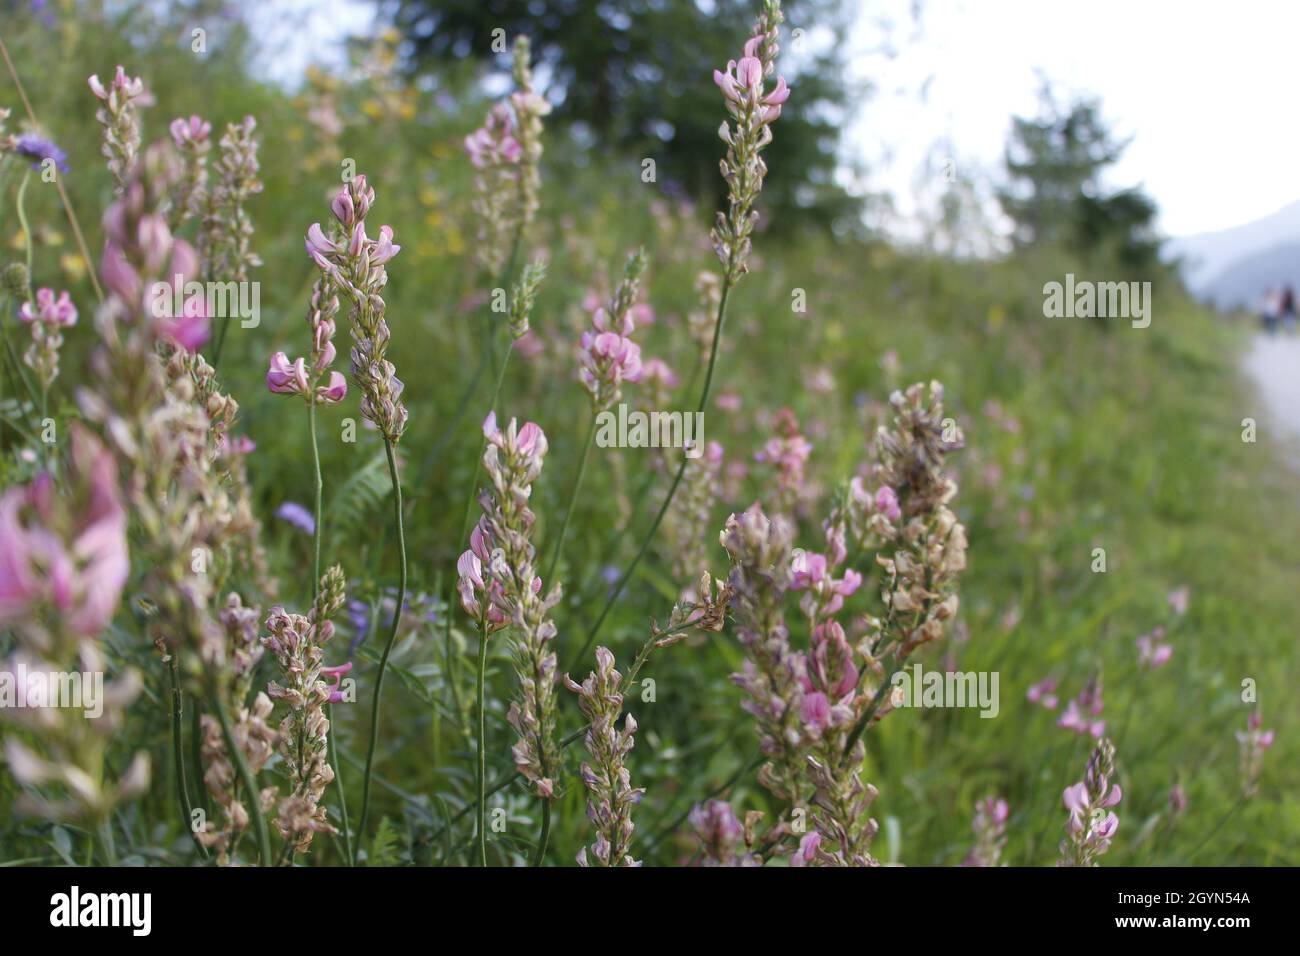 Closeup of common sainfoin flowers blooming in the meadow Stock Photo